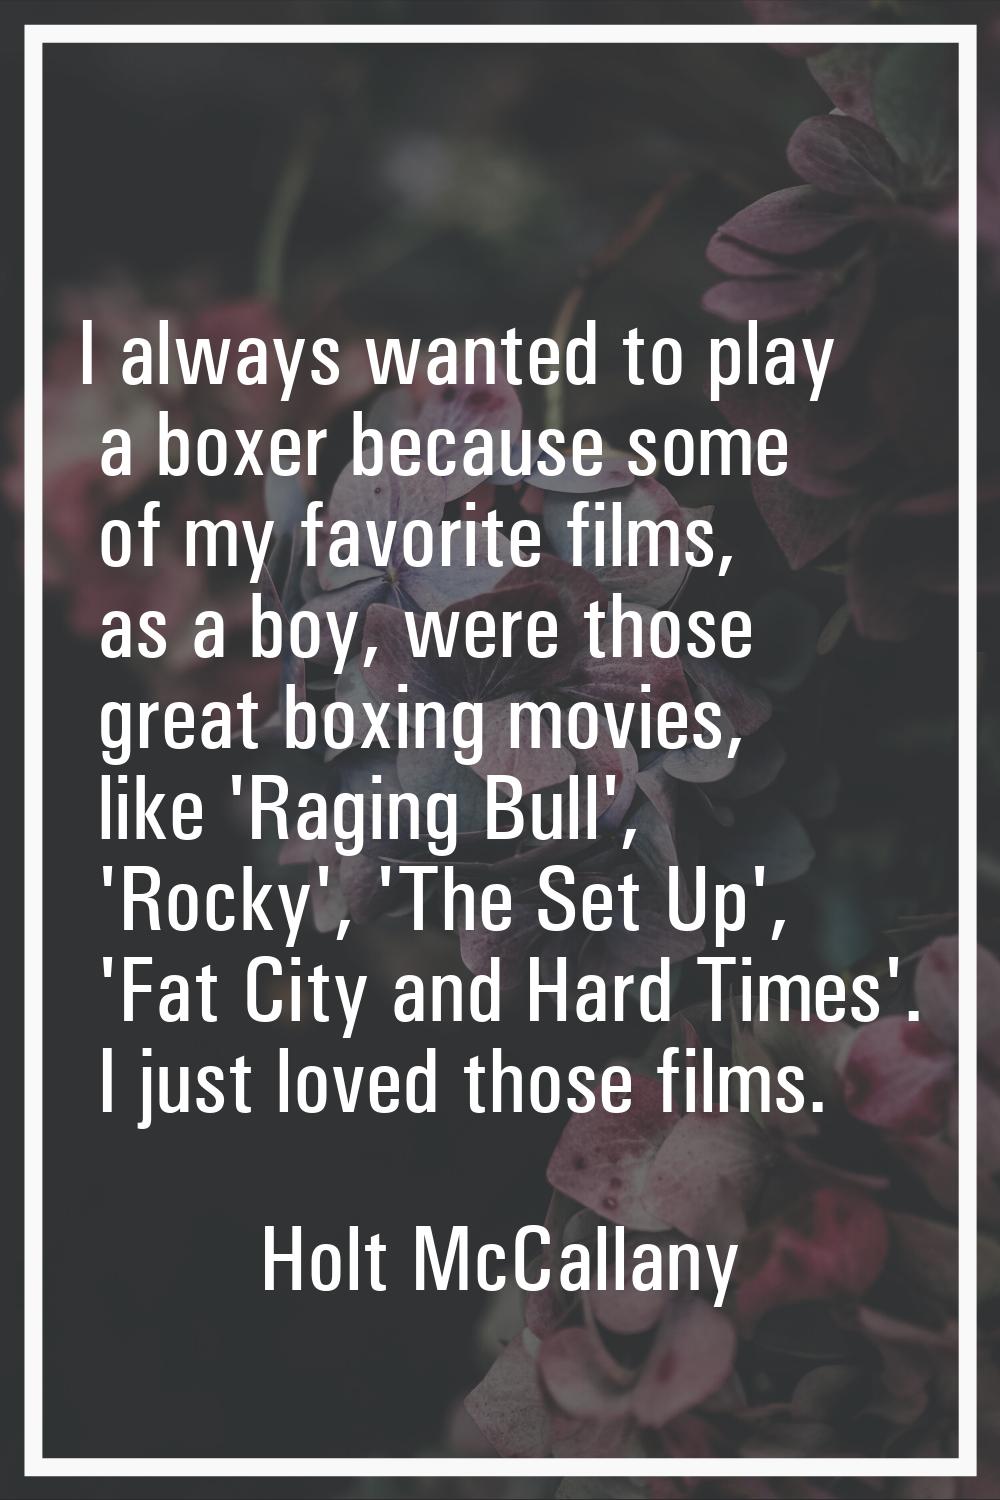 I always wanted to play a boxer because some of my favorite films, as a boy, were those great boxin